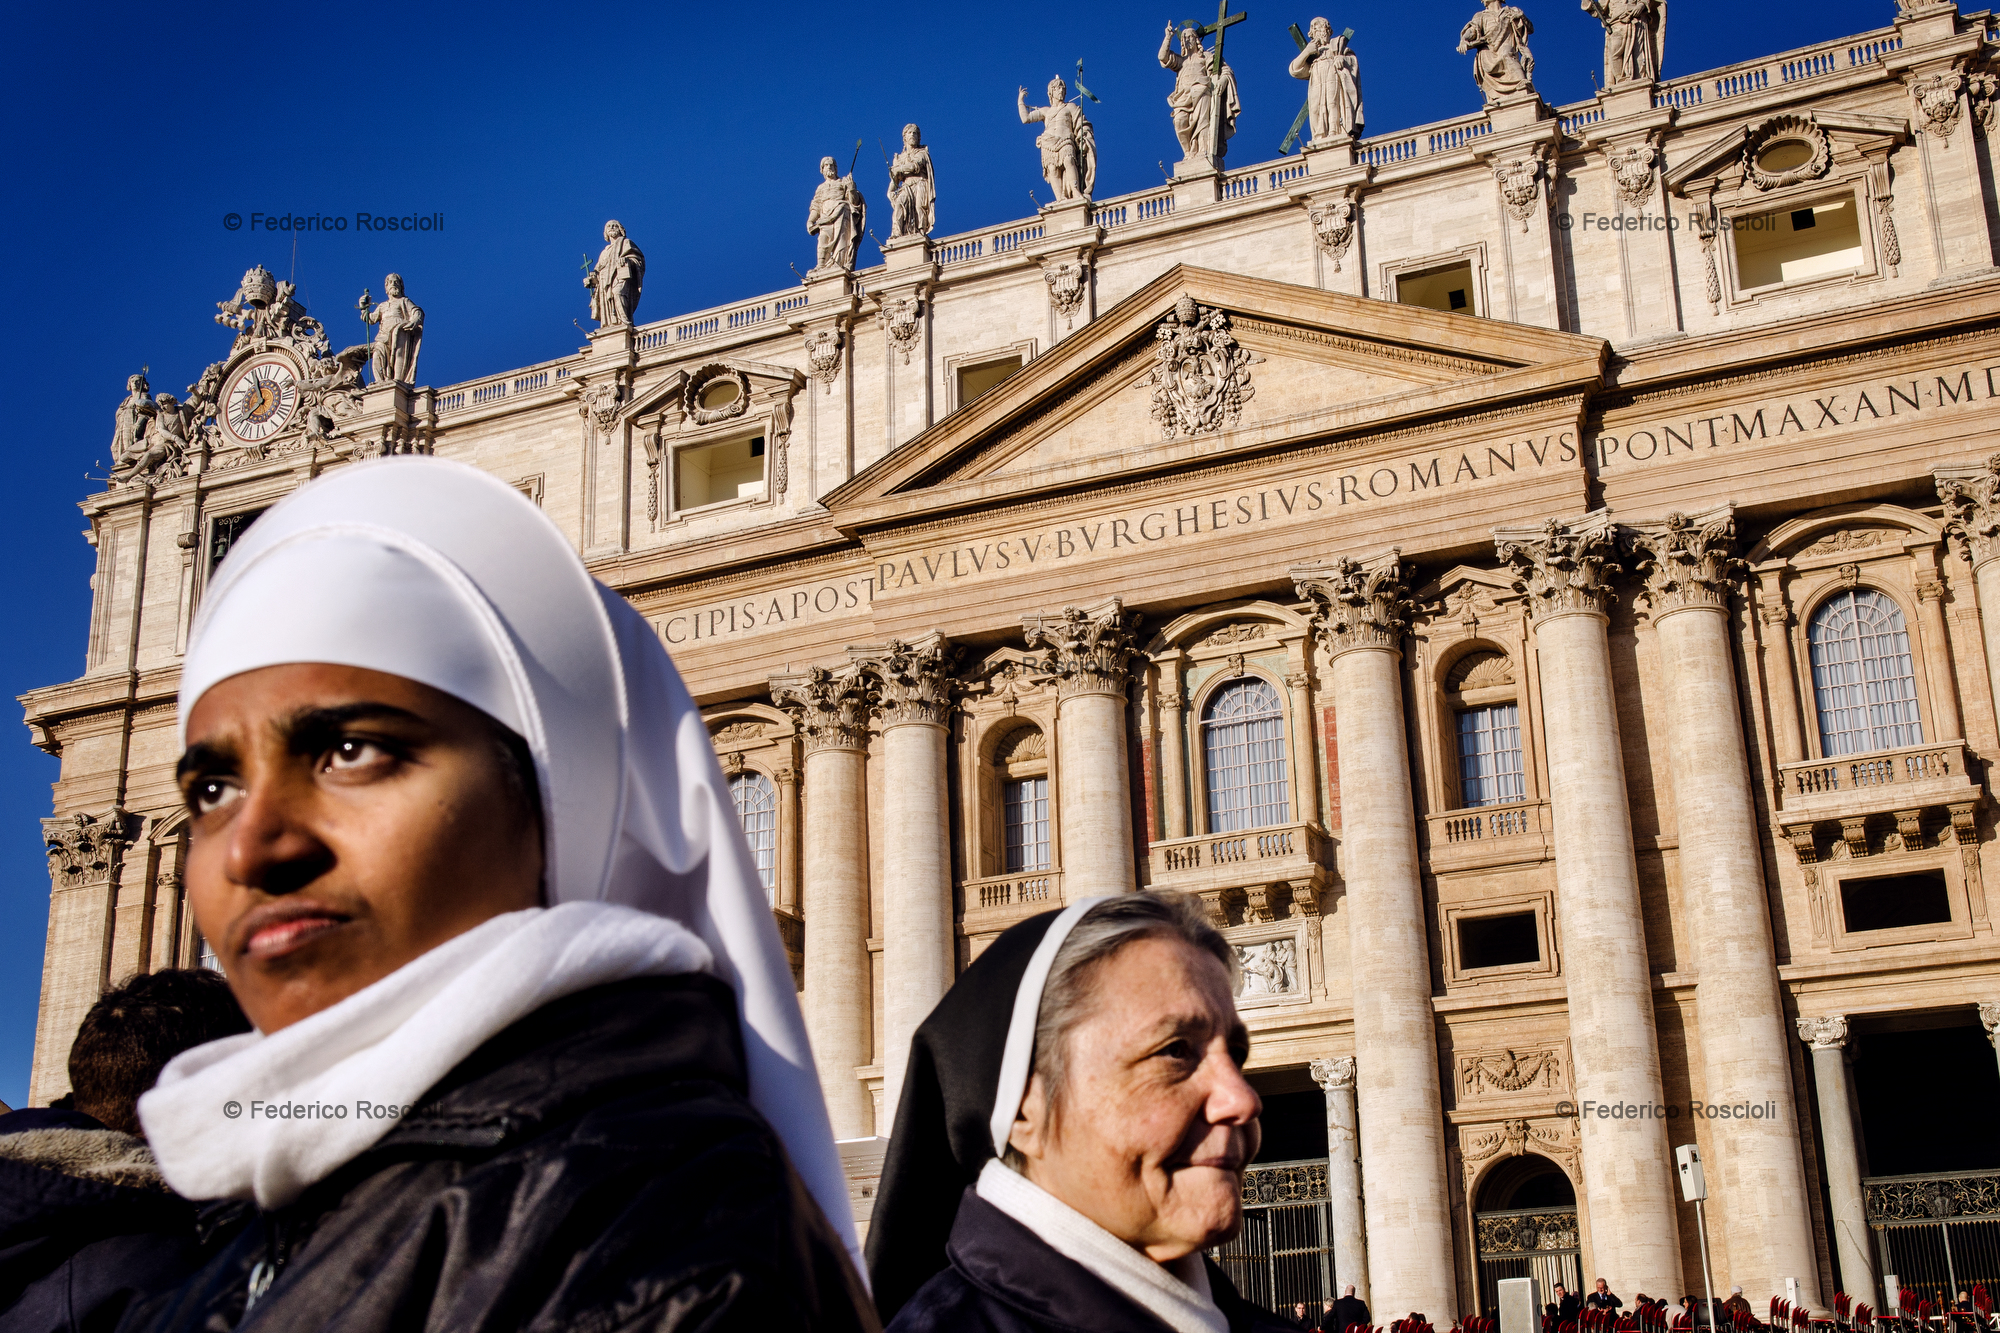 Vatican, Vatican City, February 27, 2013. Nuns waiting for Pope Benedict XVI last general audience in Saint Peter Square.